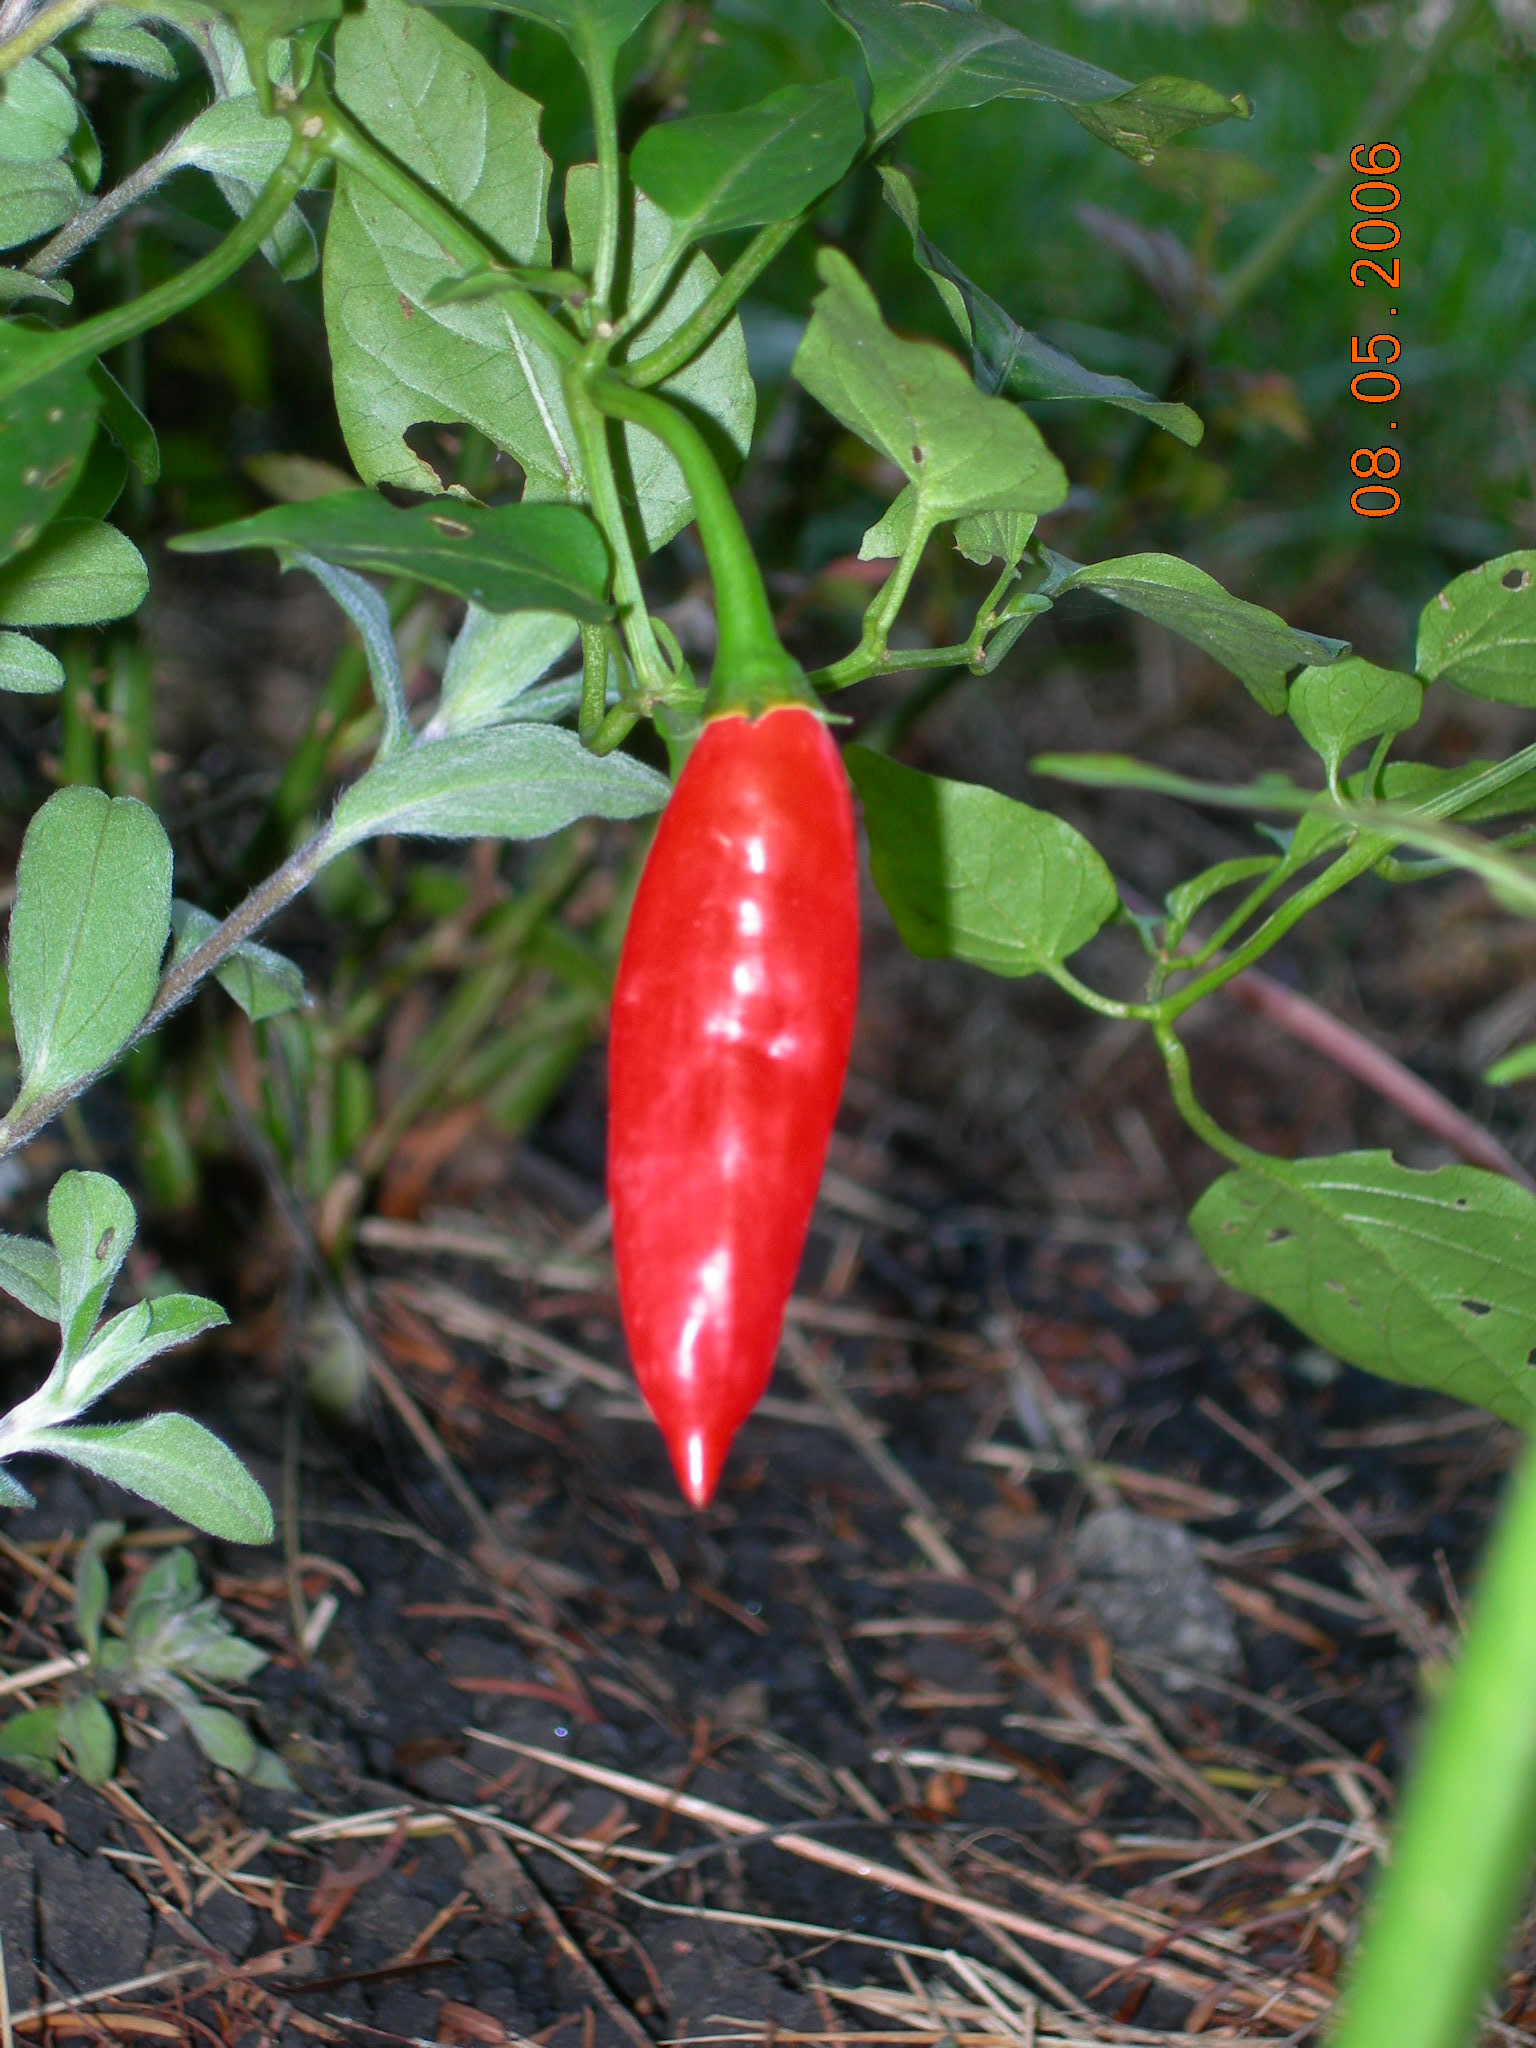 a red chili plant with many green leaves